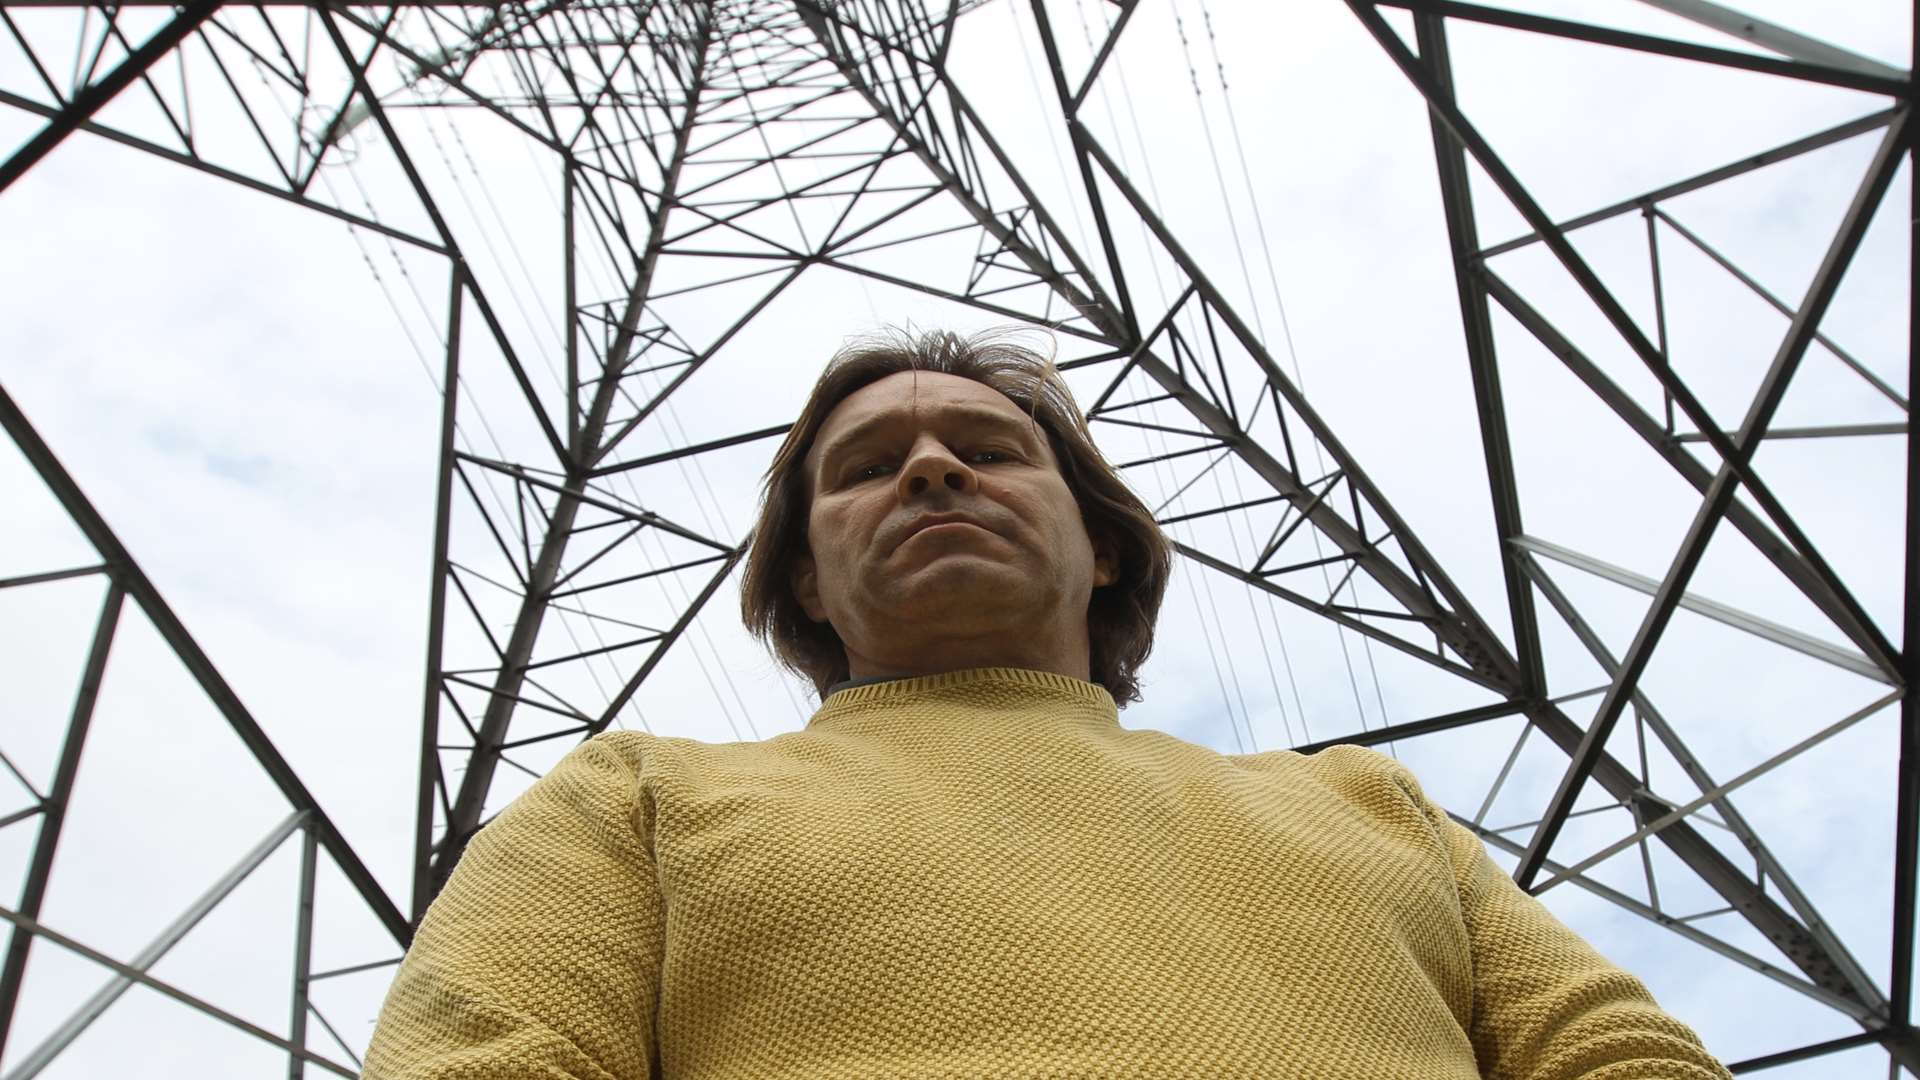 Mark Owen fears electricity pylons may have caused his cancer